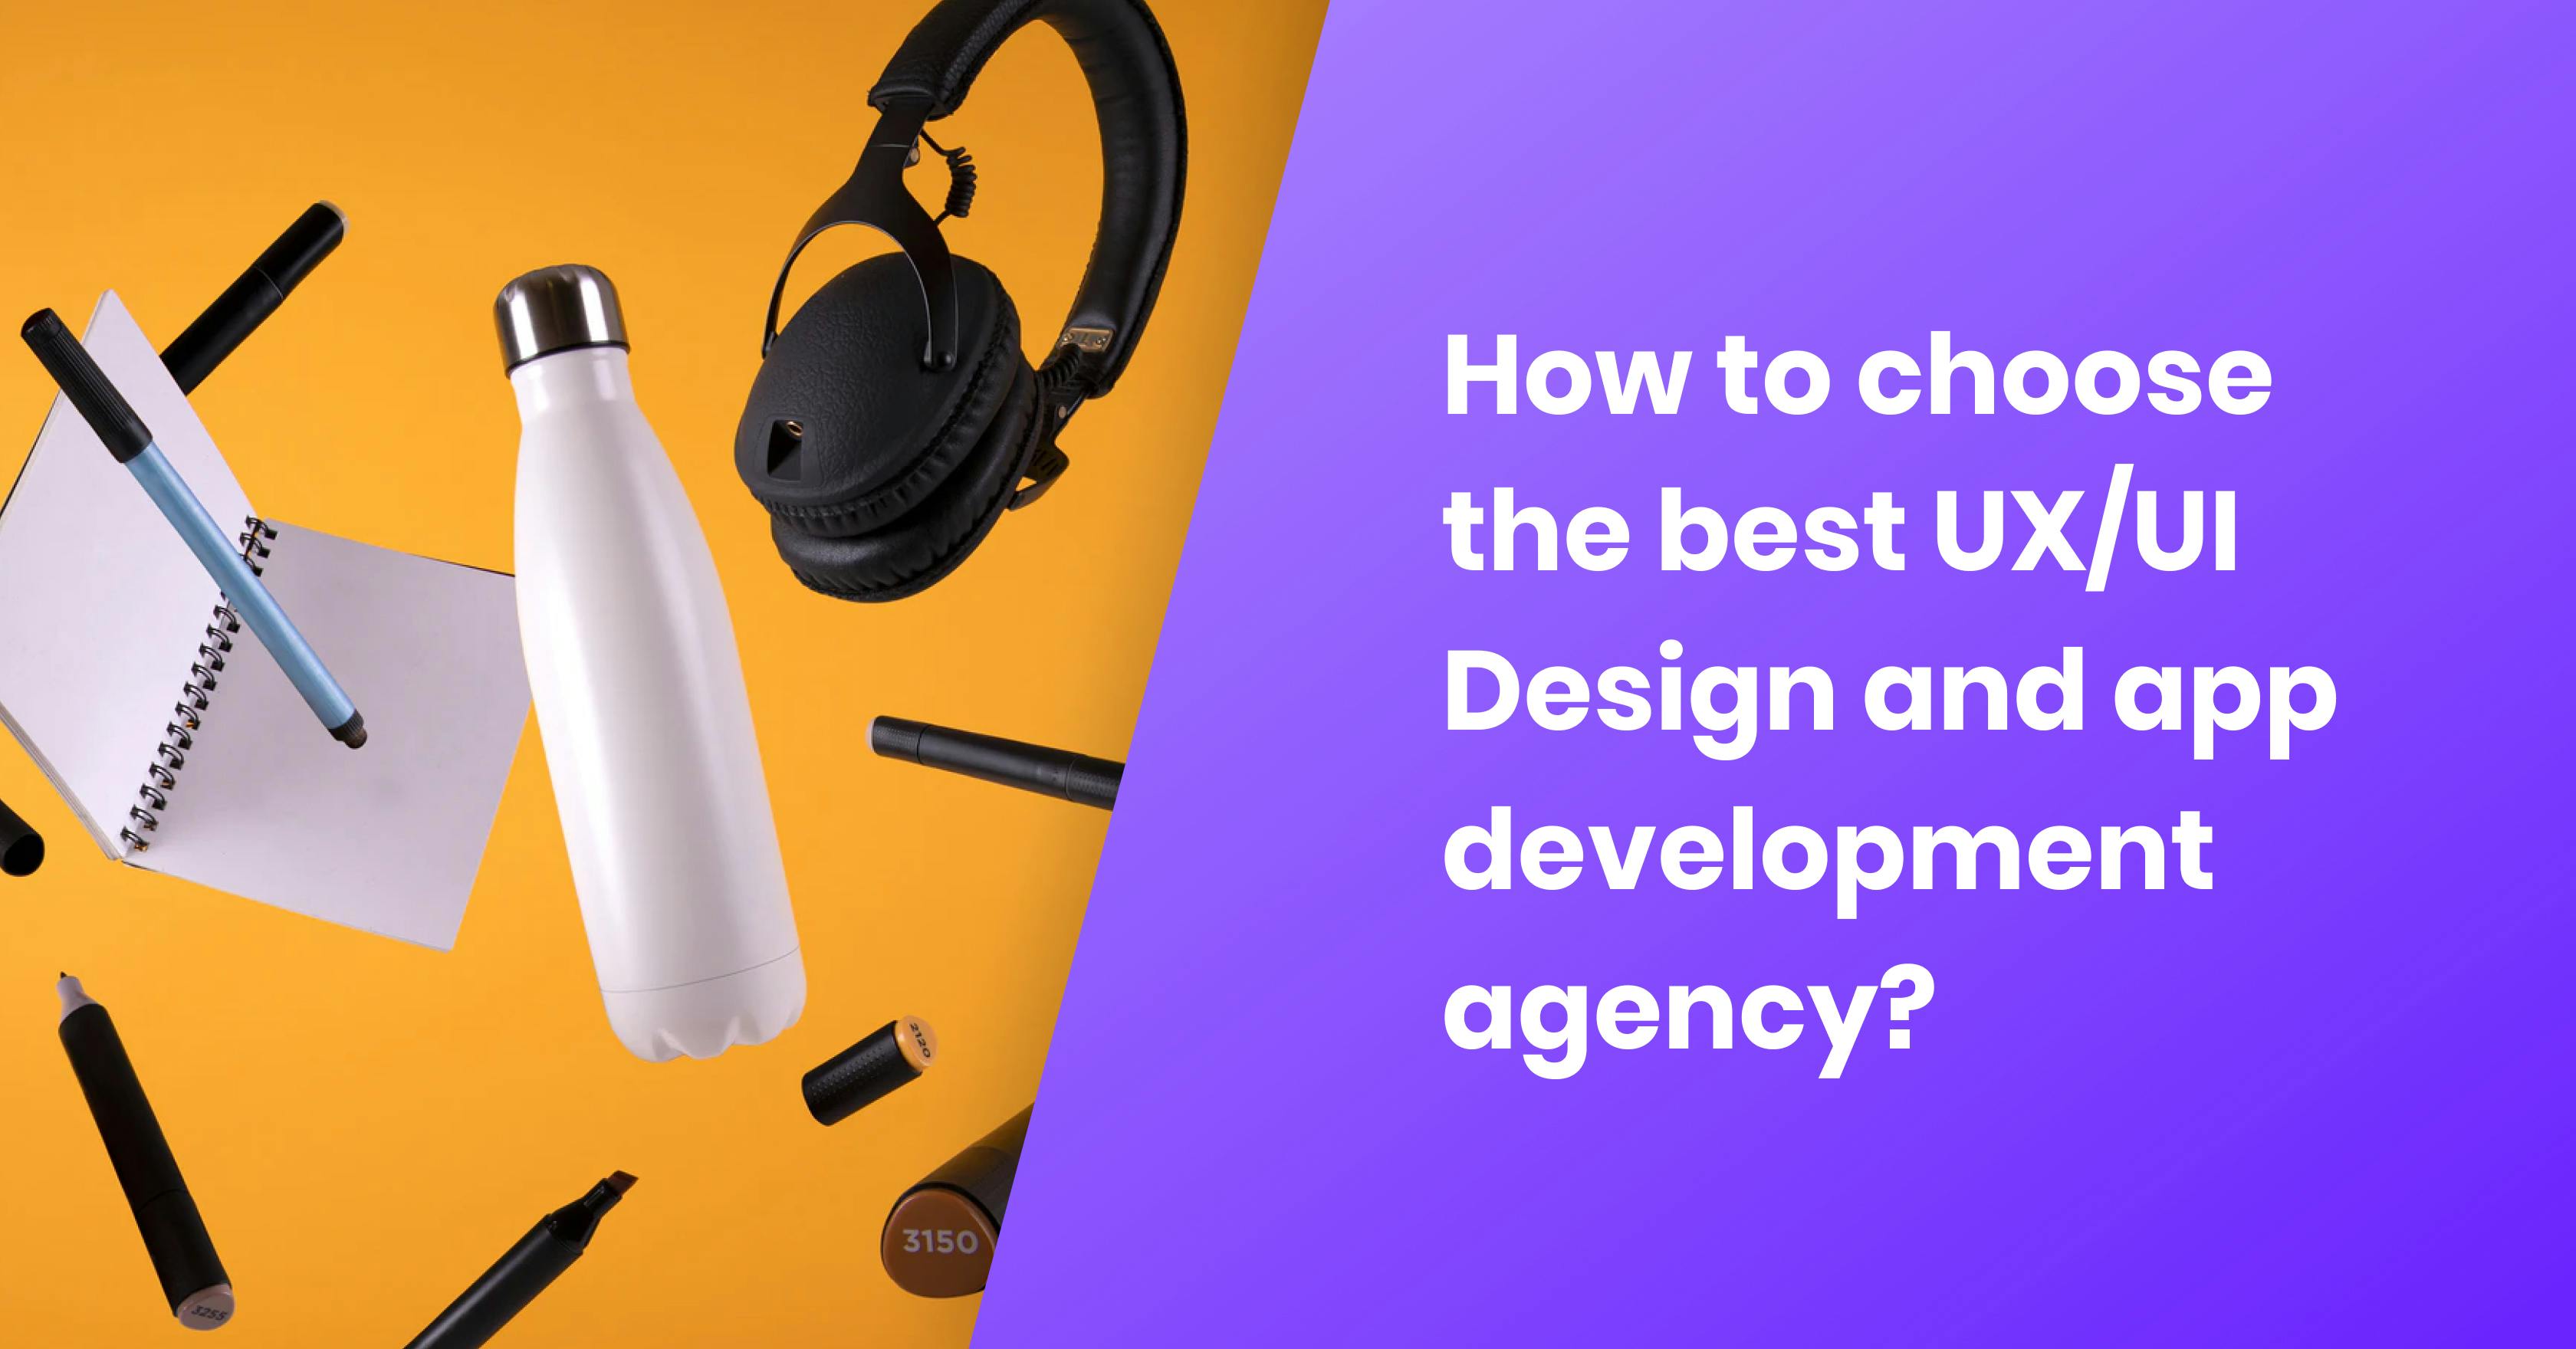 Nightborn - How to choose the best UX/UI Design and app development agency